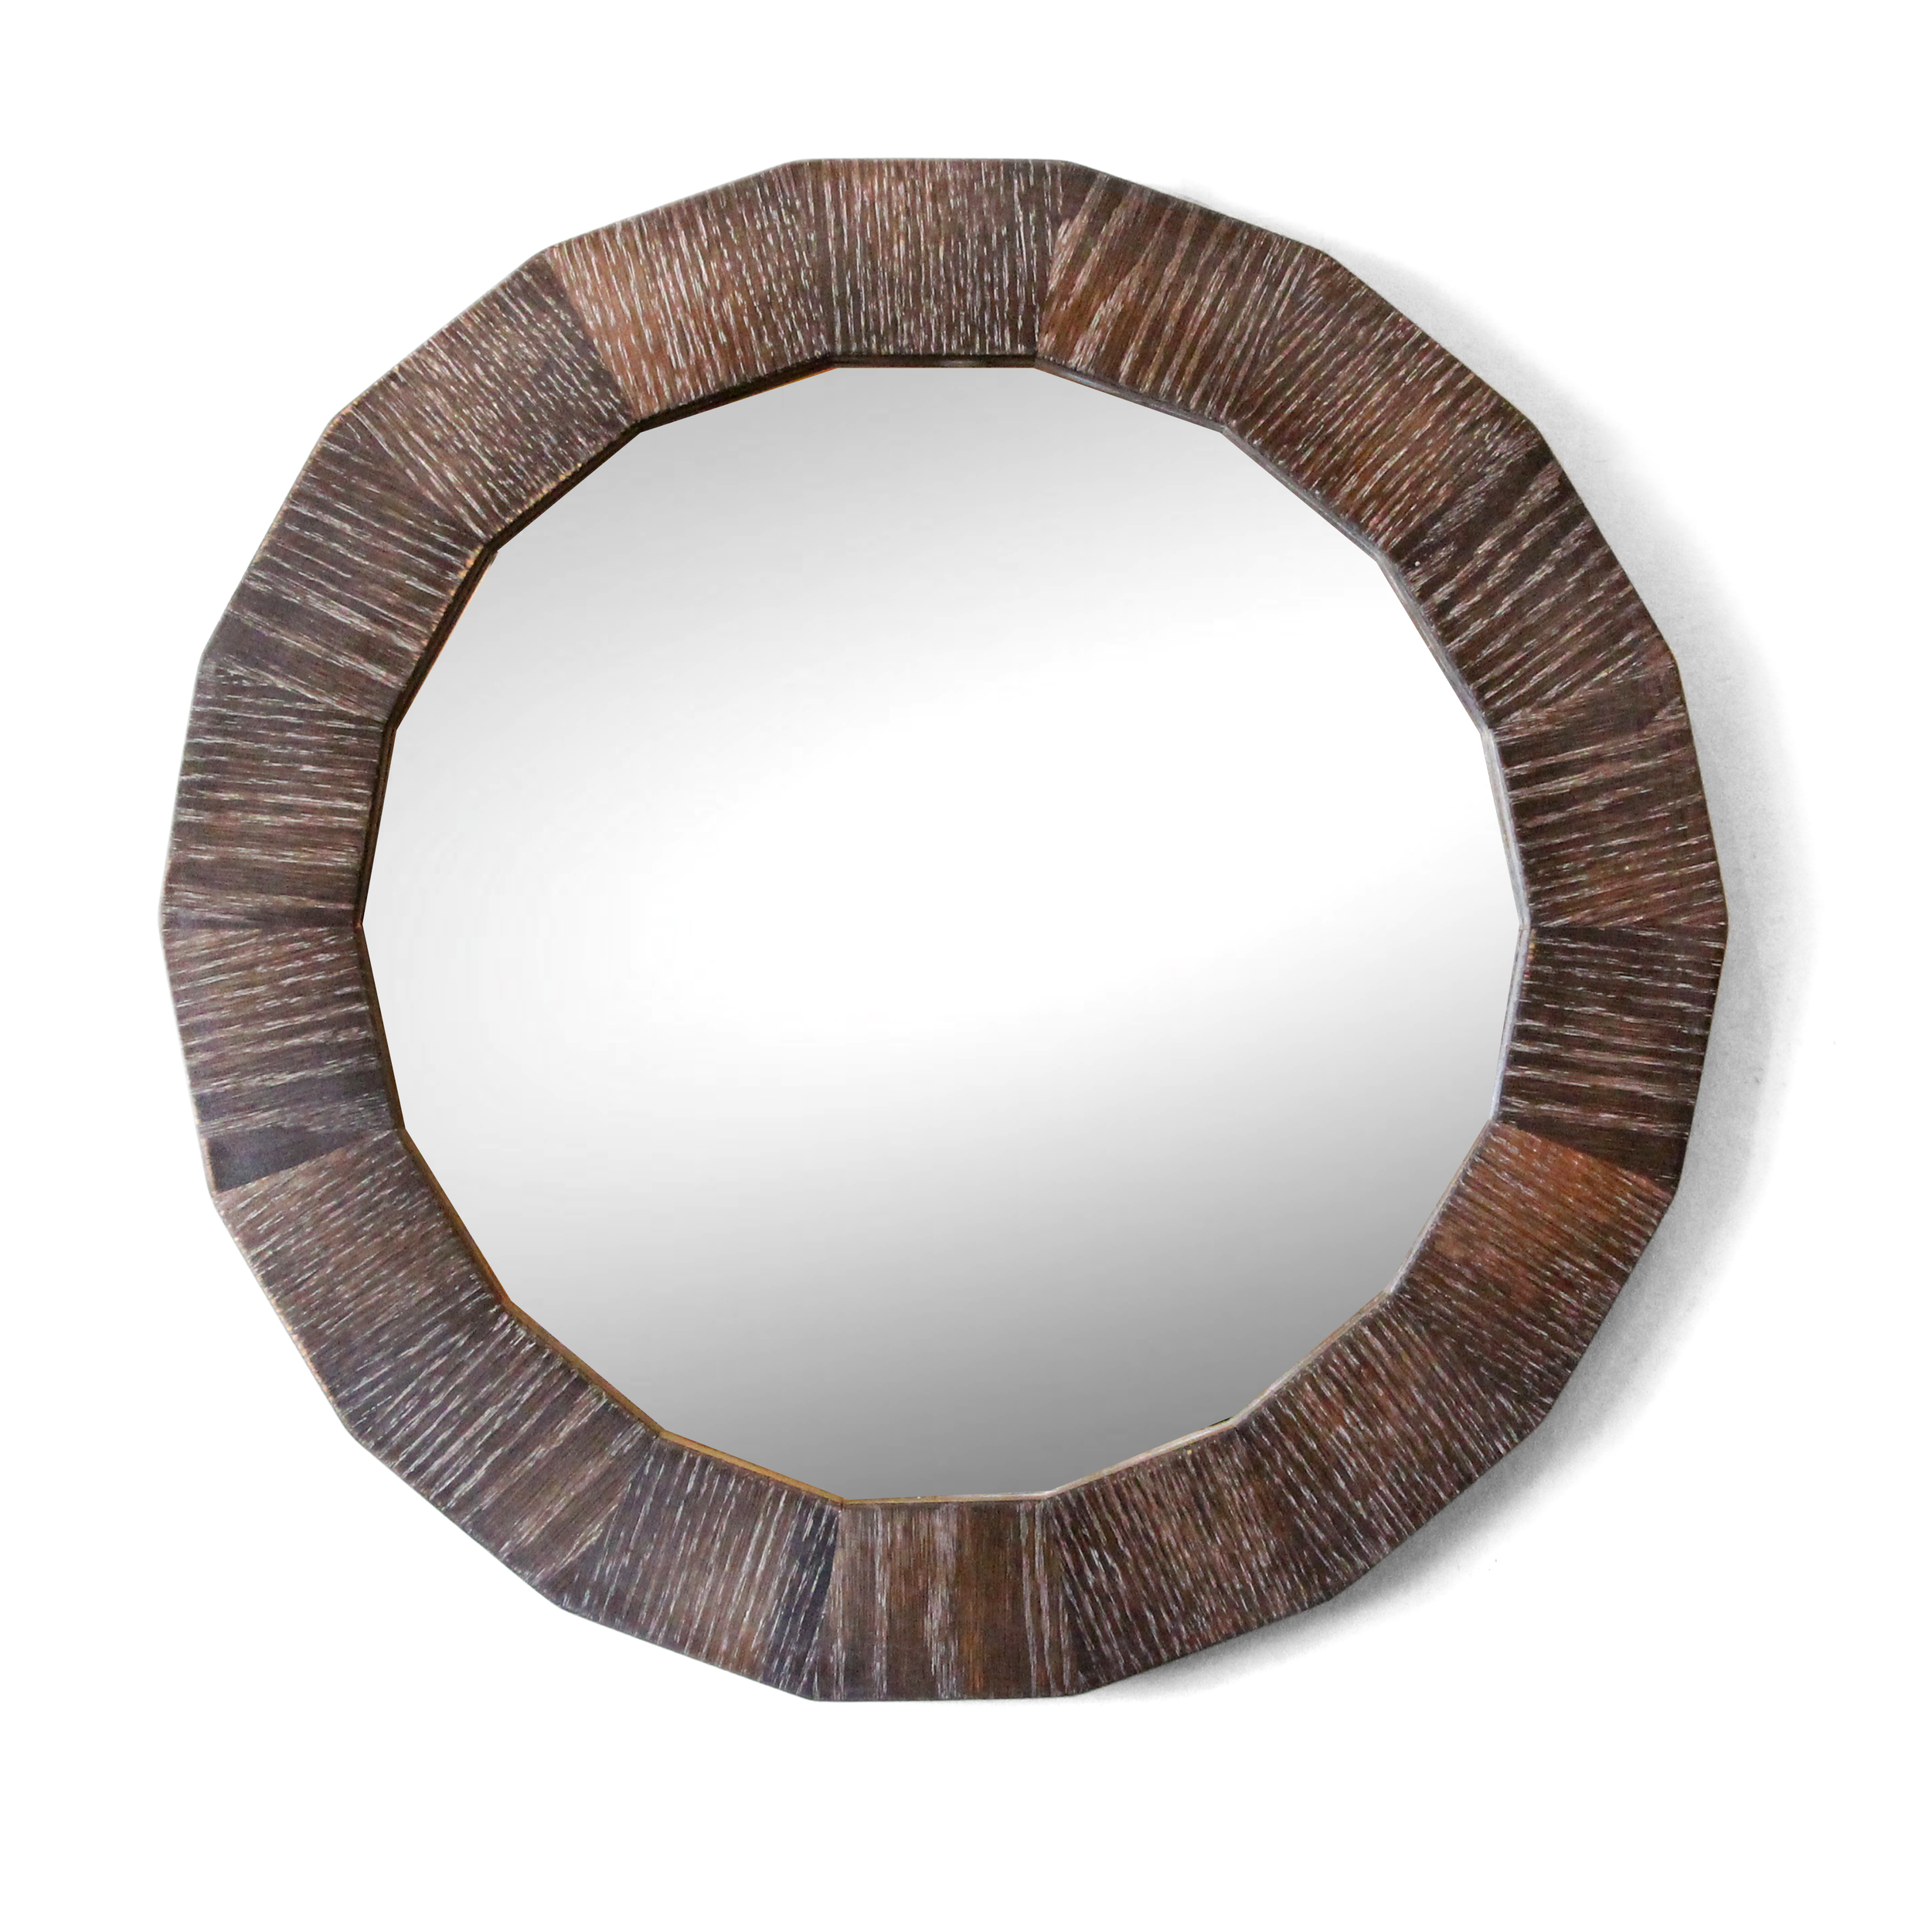 Round Mirror | Reclaimed Wood | The Murphy